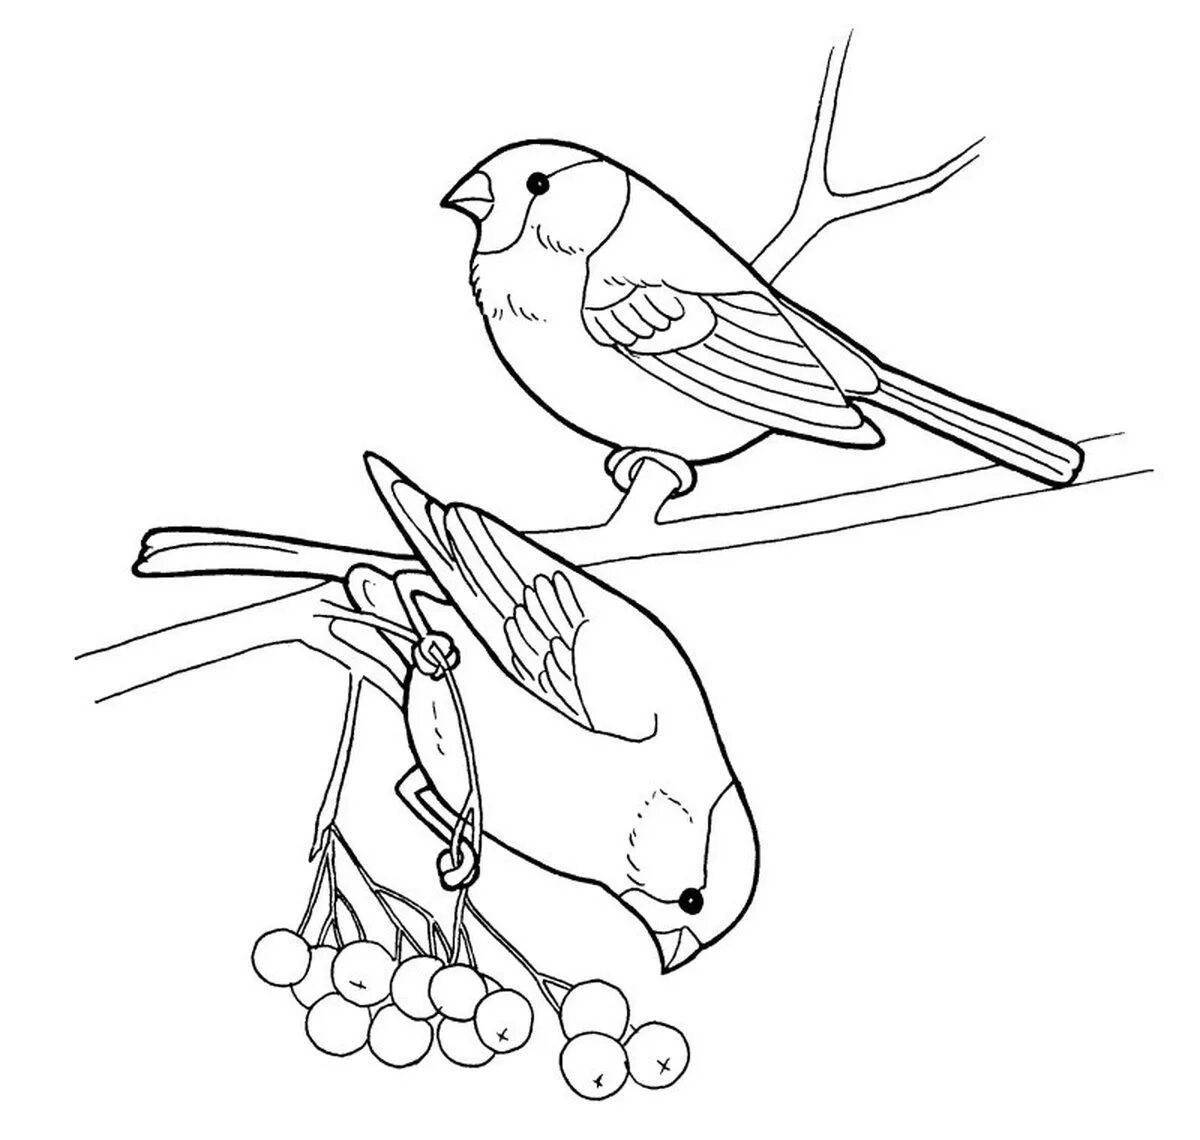 Coloring bullfinch and titmouse